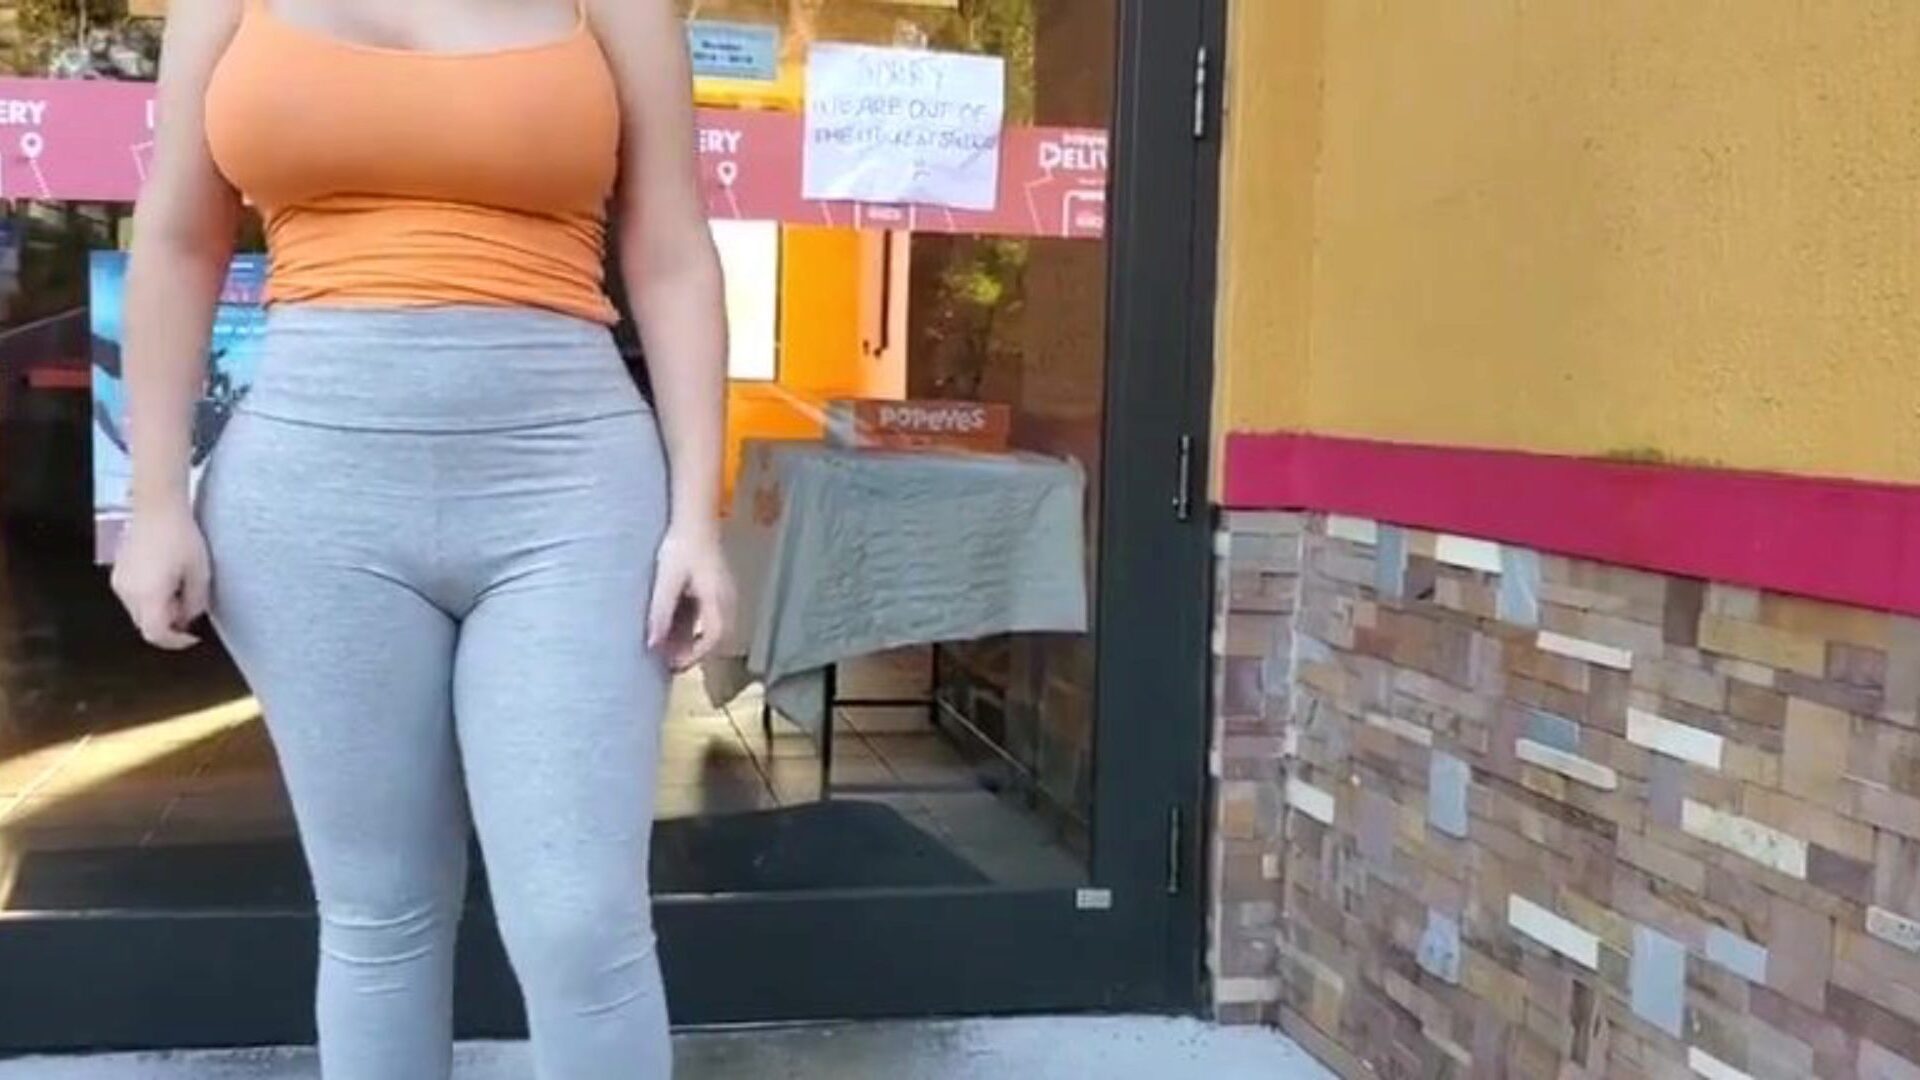 A PAWG Let Me Fuck Her For A Popeyes Chicken Sandwich